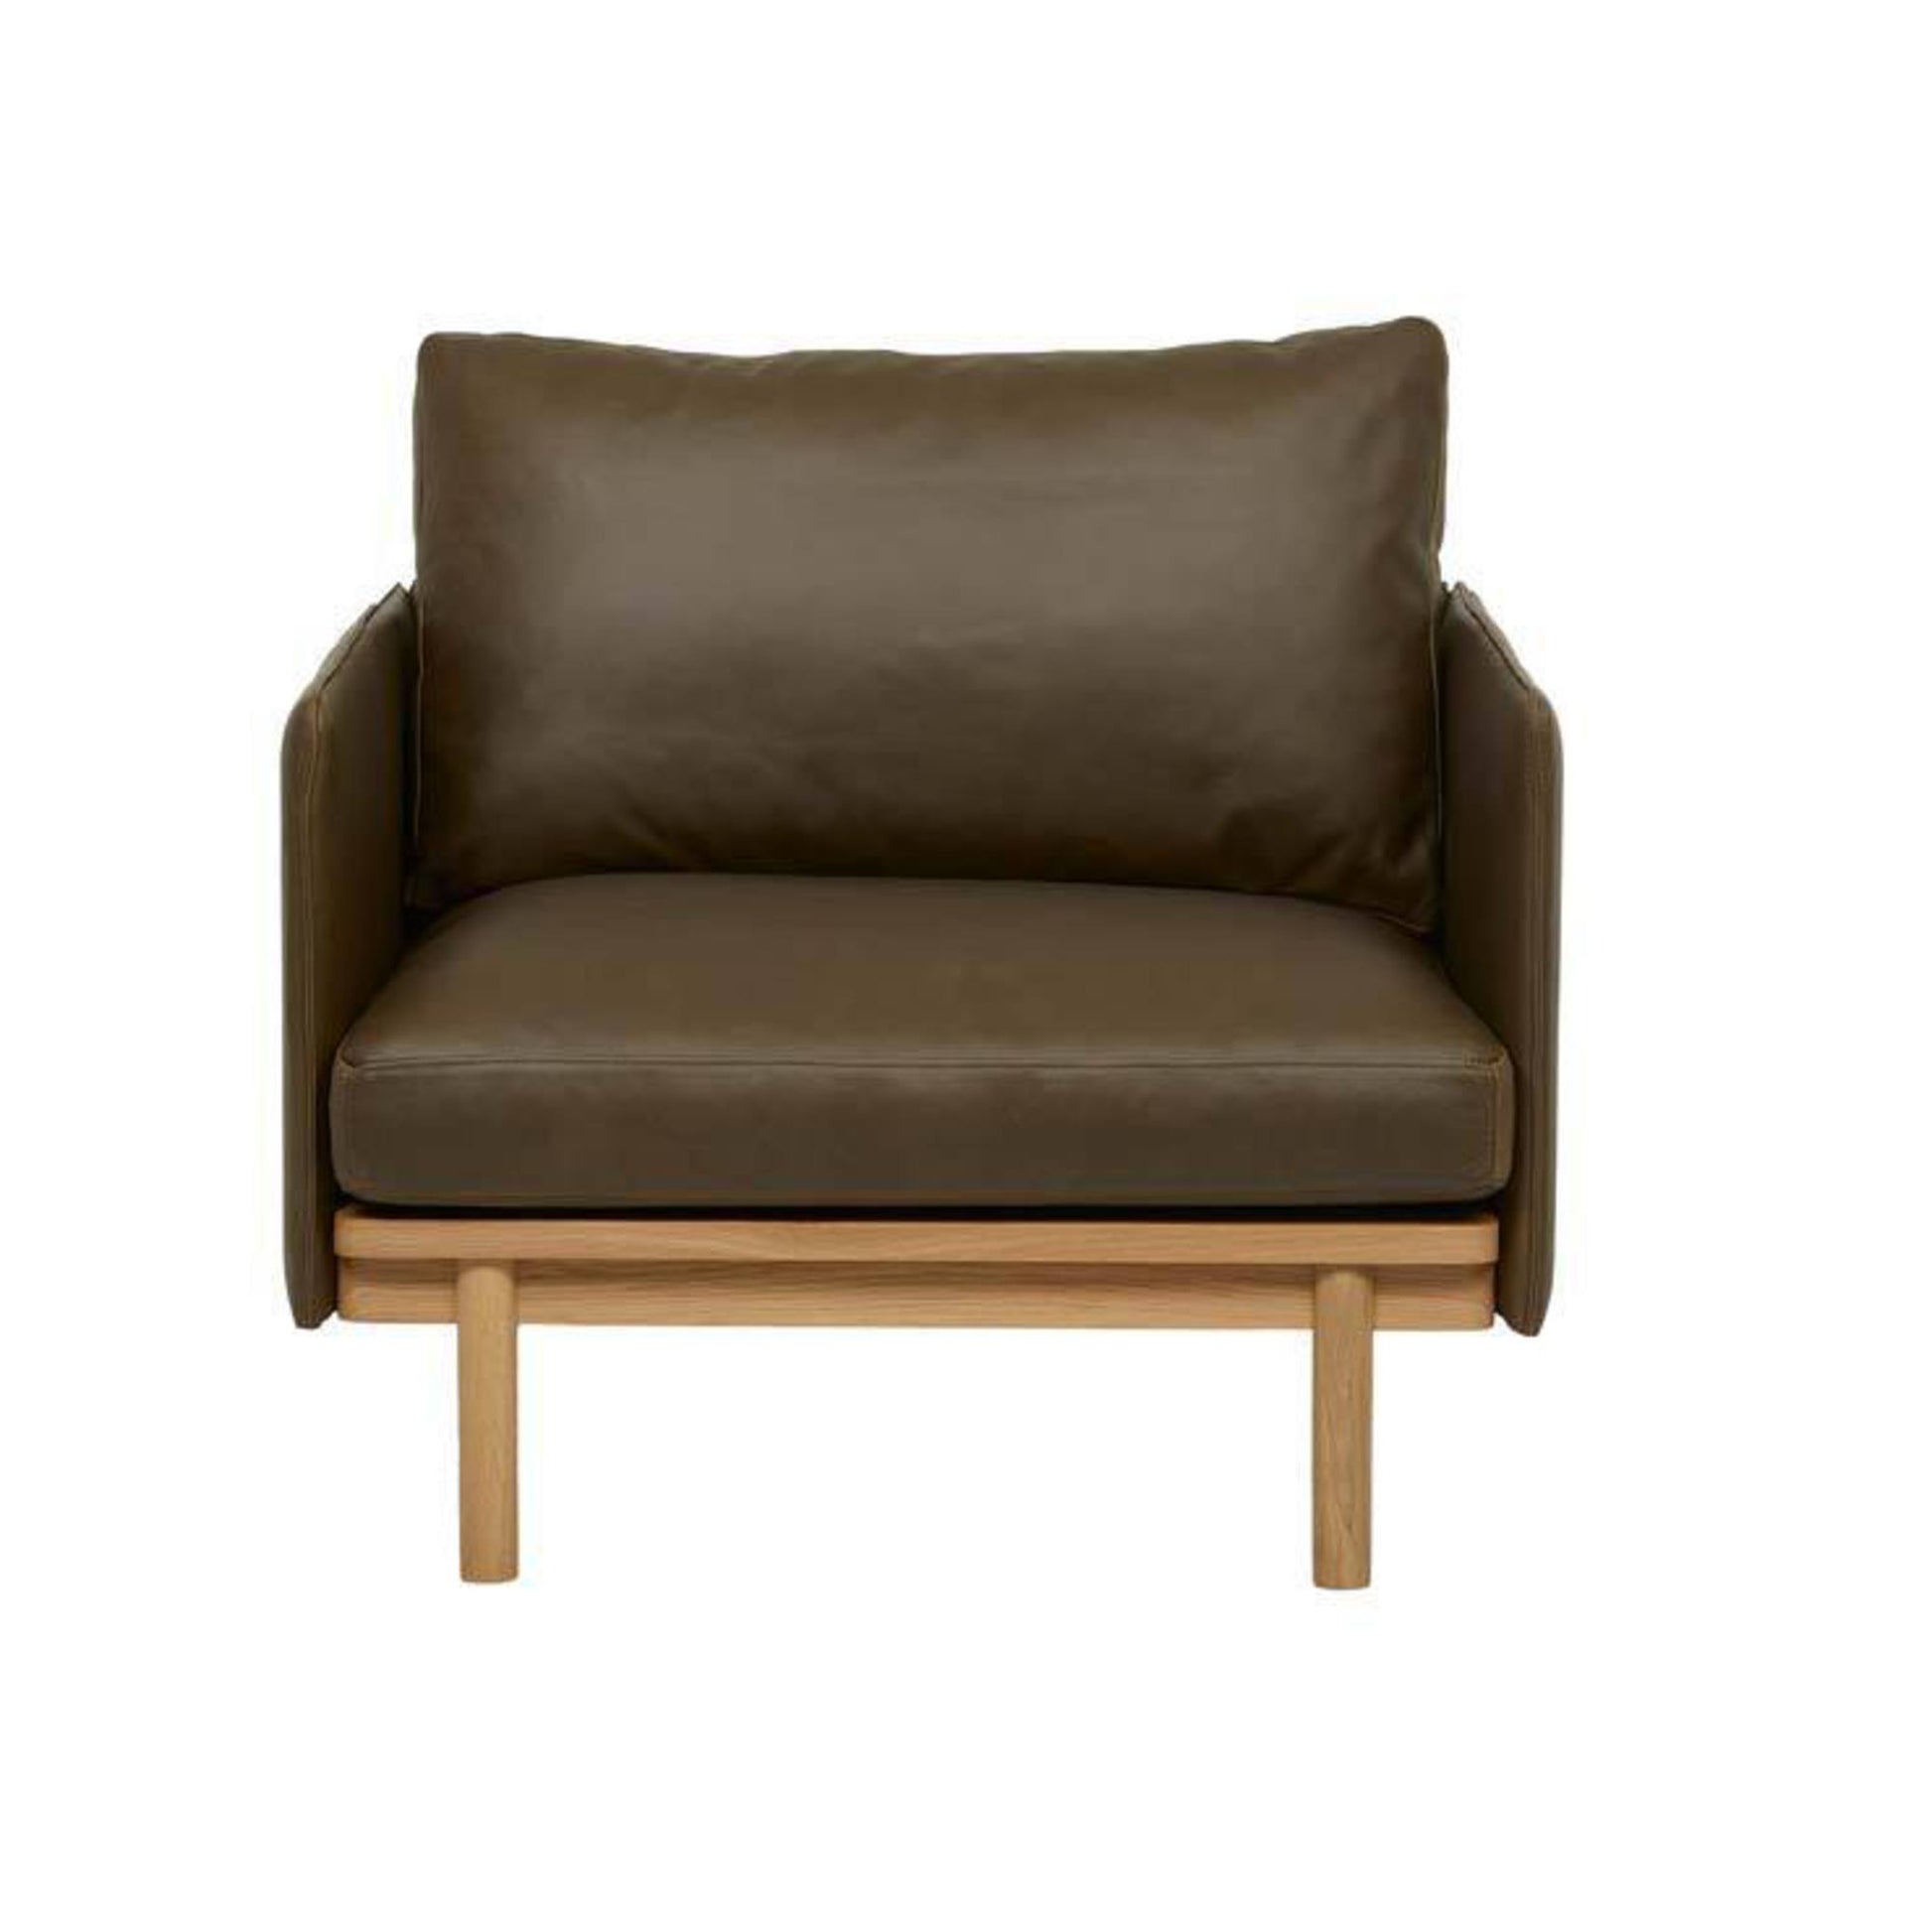 Tolv chair in heritage hunter green leather